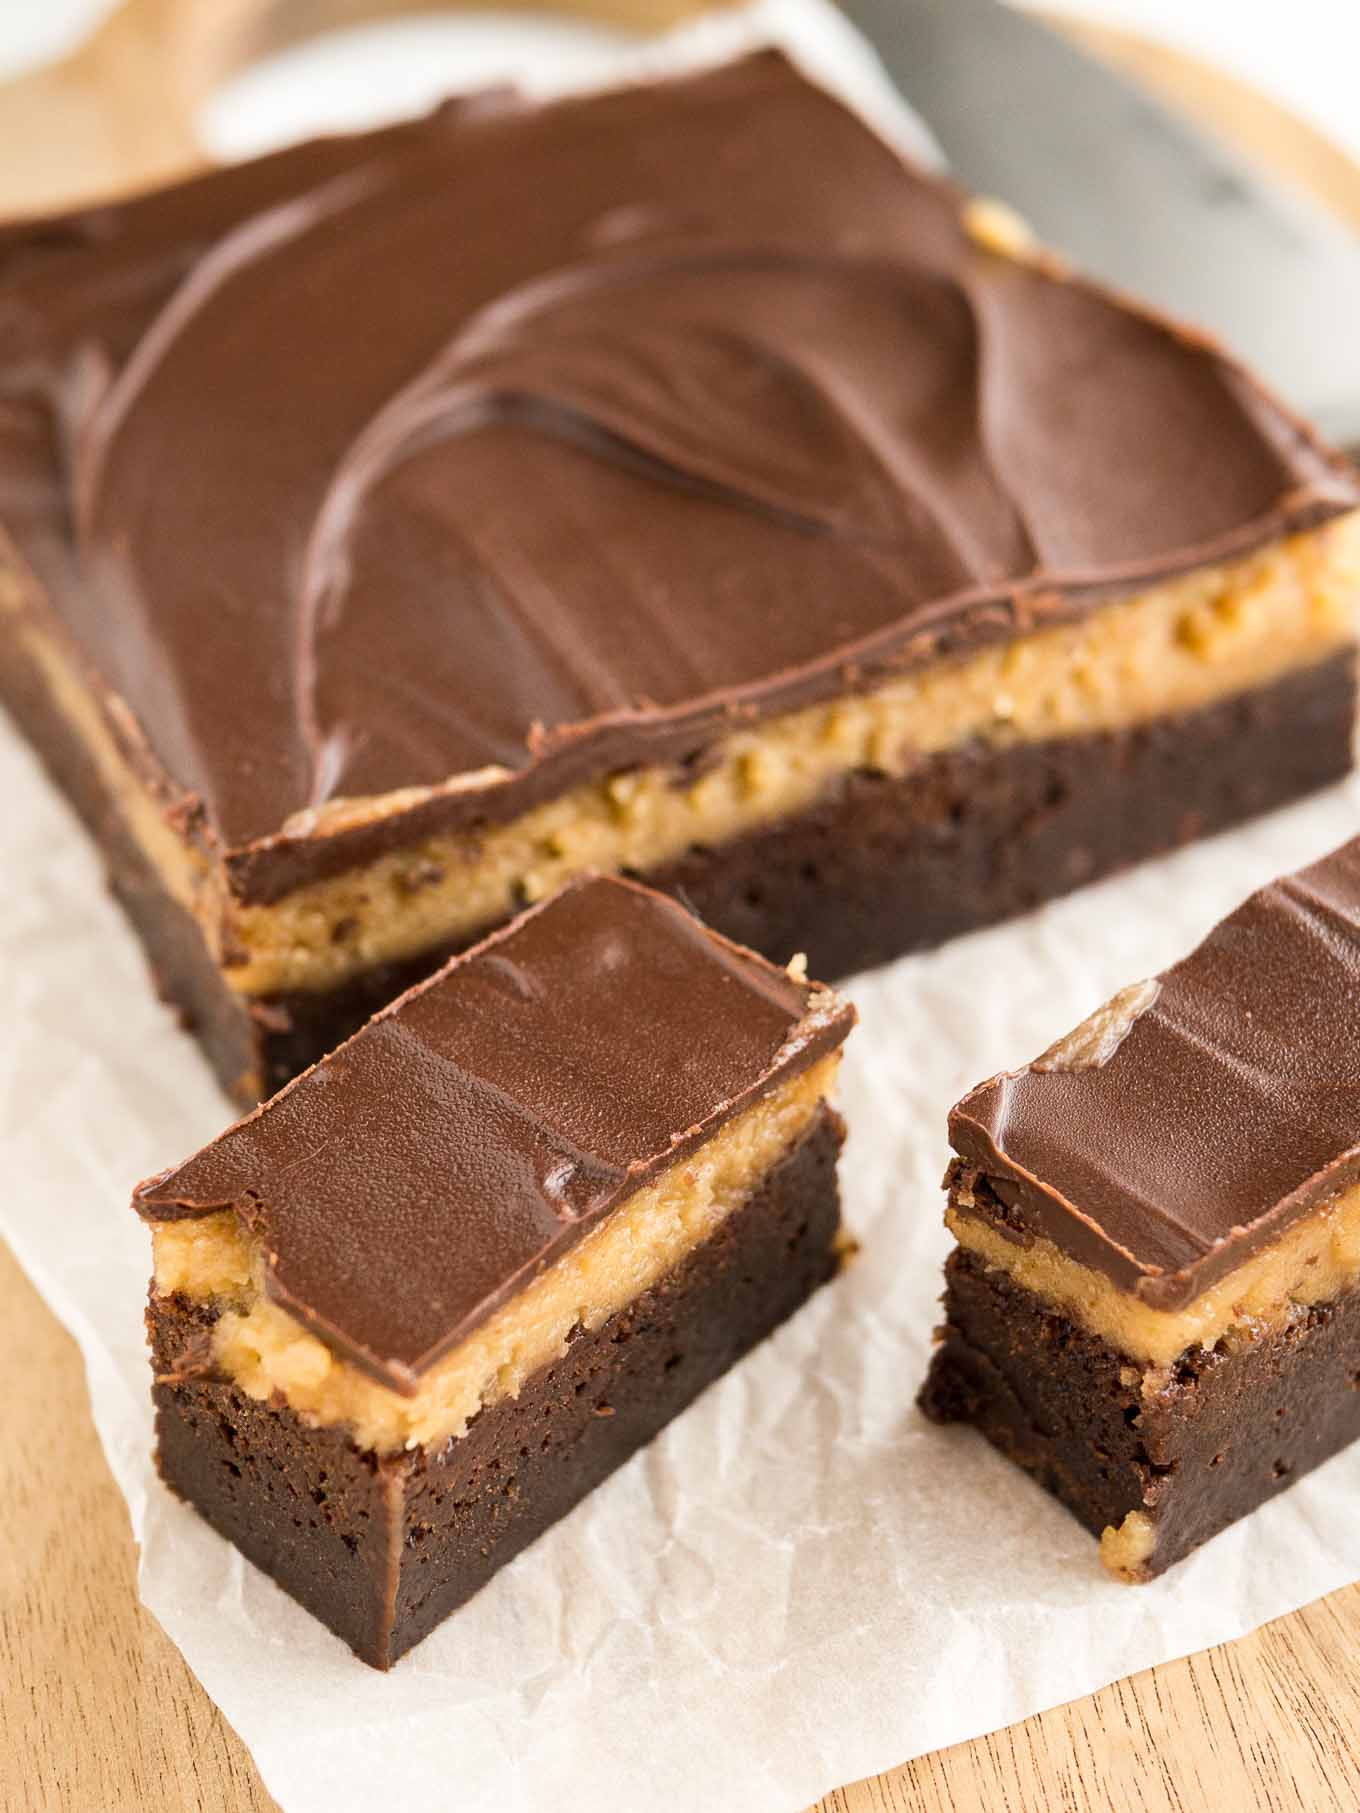 Peanut butter brownie bars on a wooden cutting board lined with parchment paper.